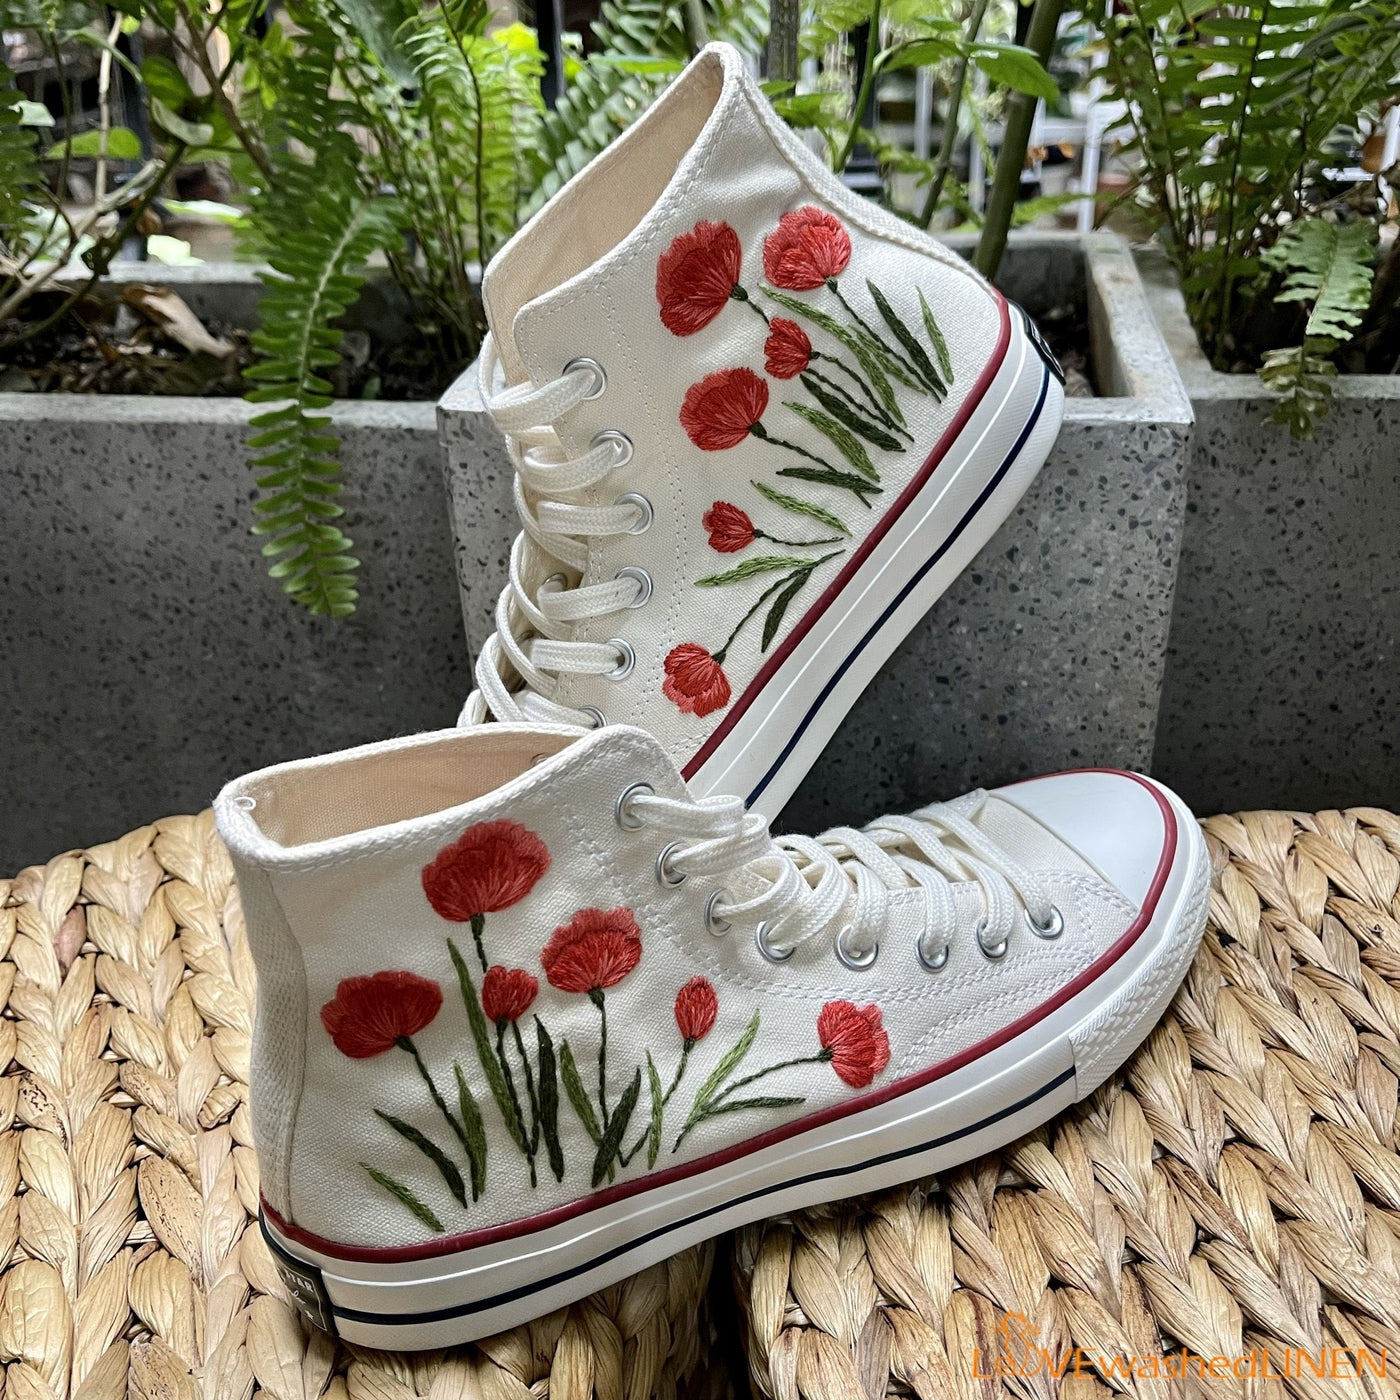 Custom Embroidered Converse High Tops Chuck Taylor 1970s Wedding Hand